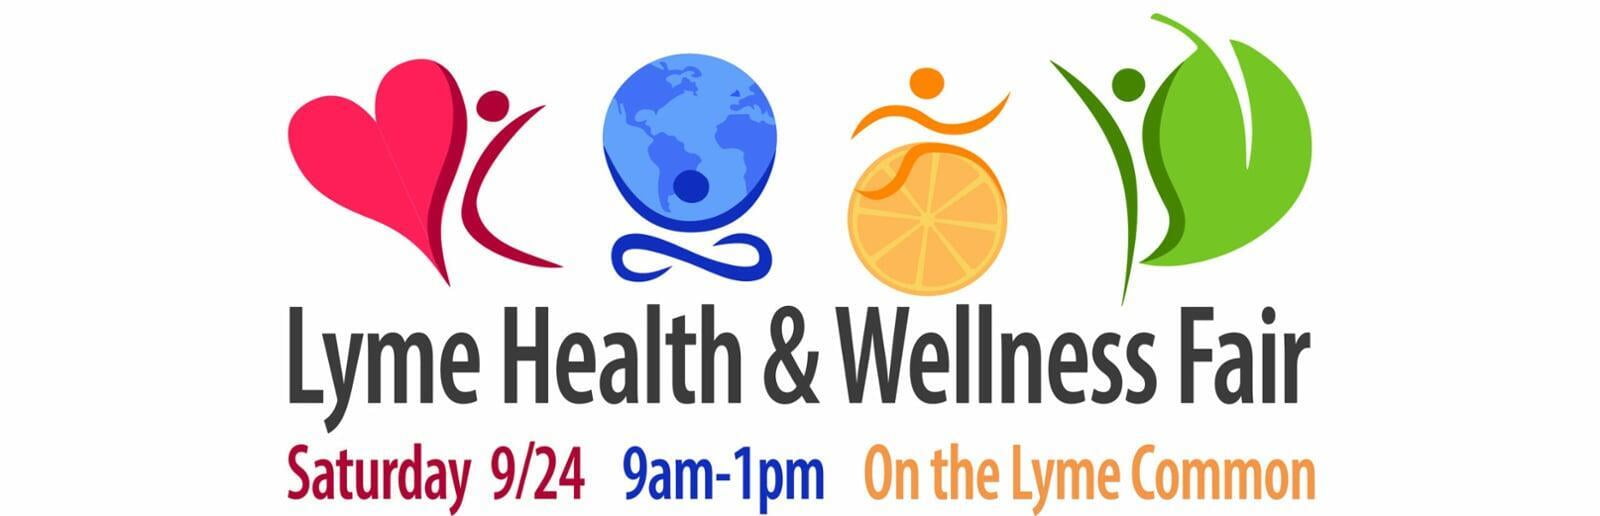 Join me this Saturday at the Lyme Health and Wellness Fair!